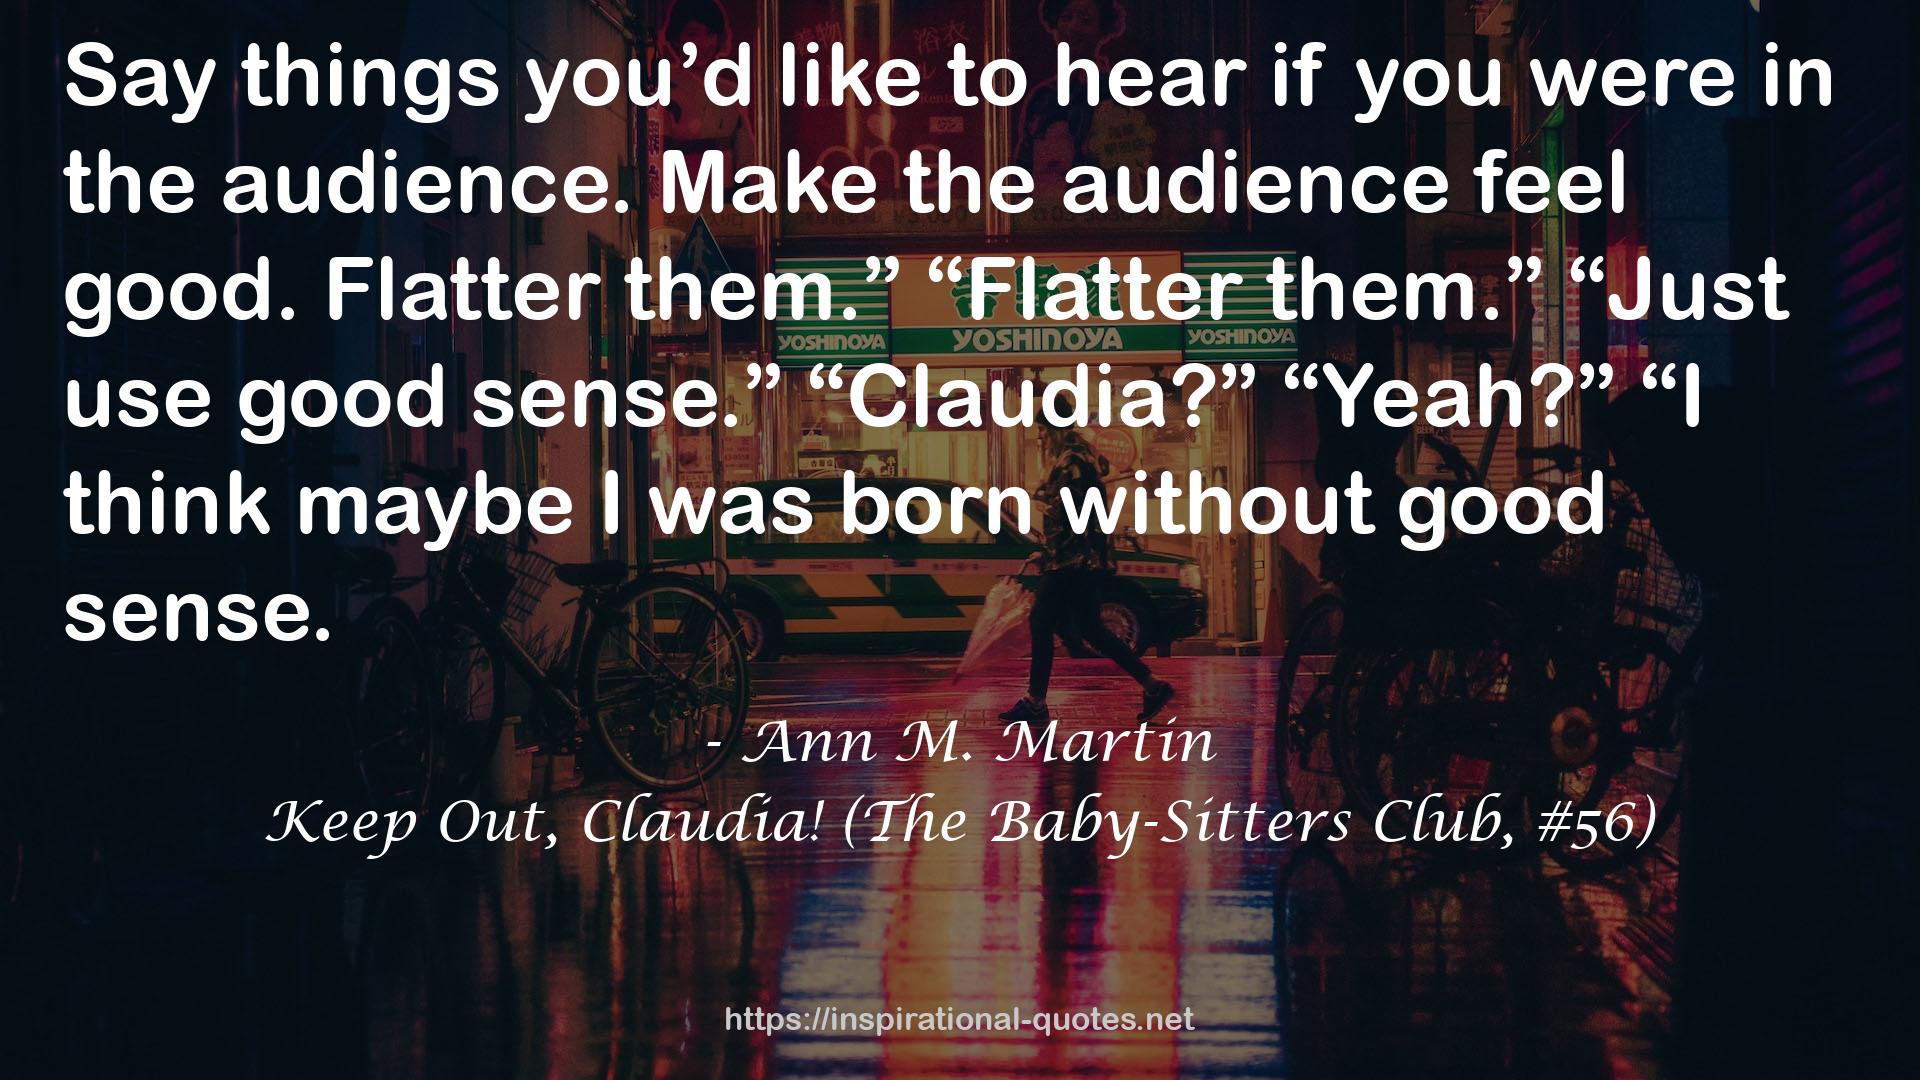 Keep Out, Claudia! (The Baby-Sitters Club, #56) QUOTES